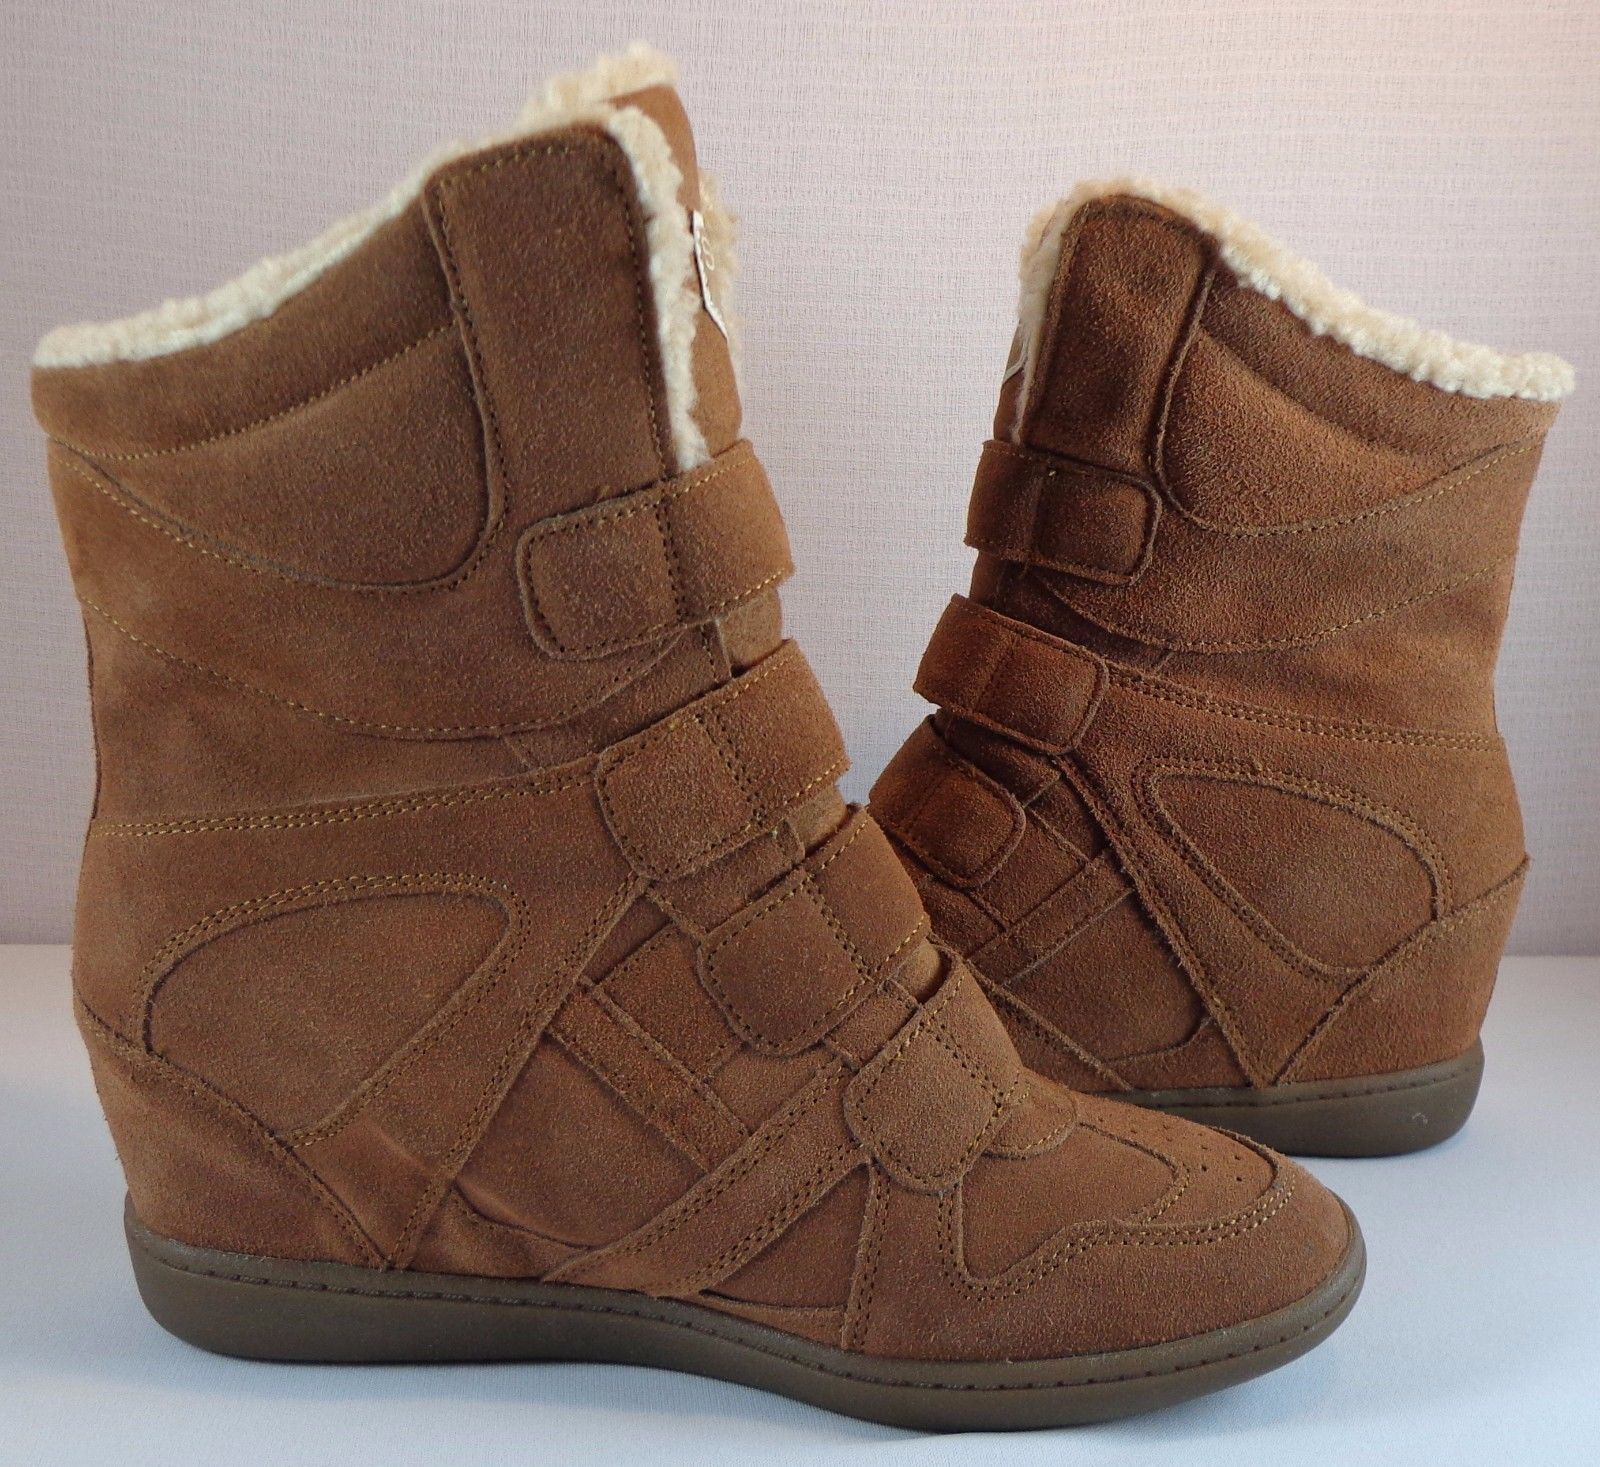 skechers fur lined boots womens